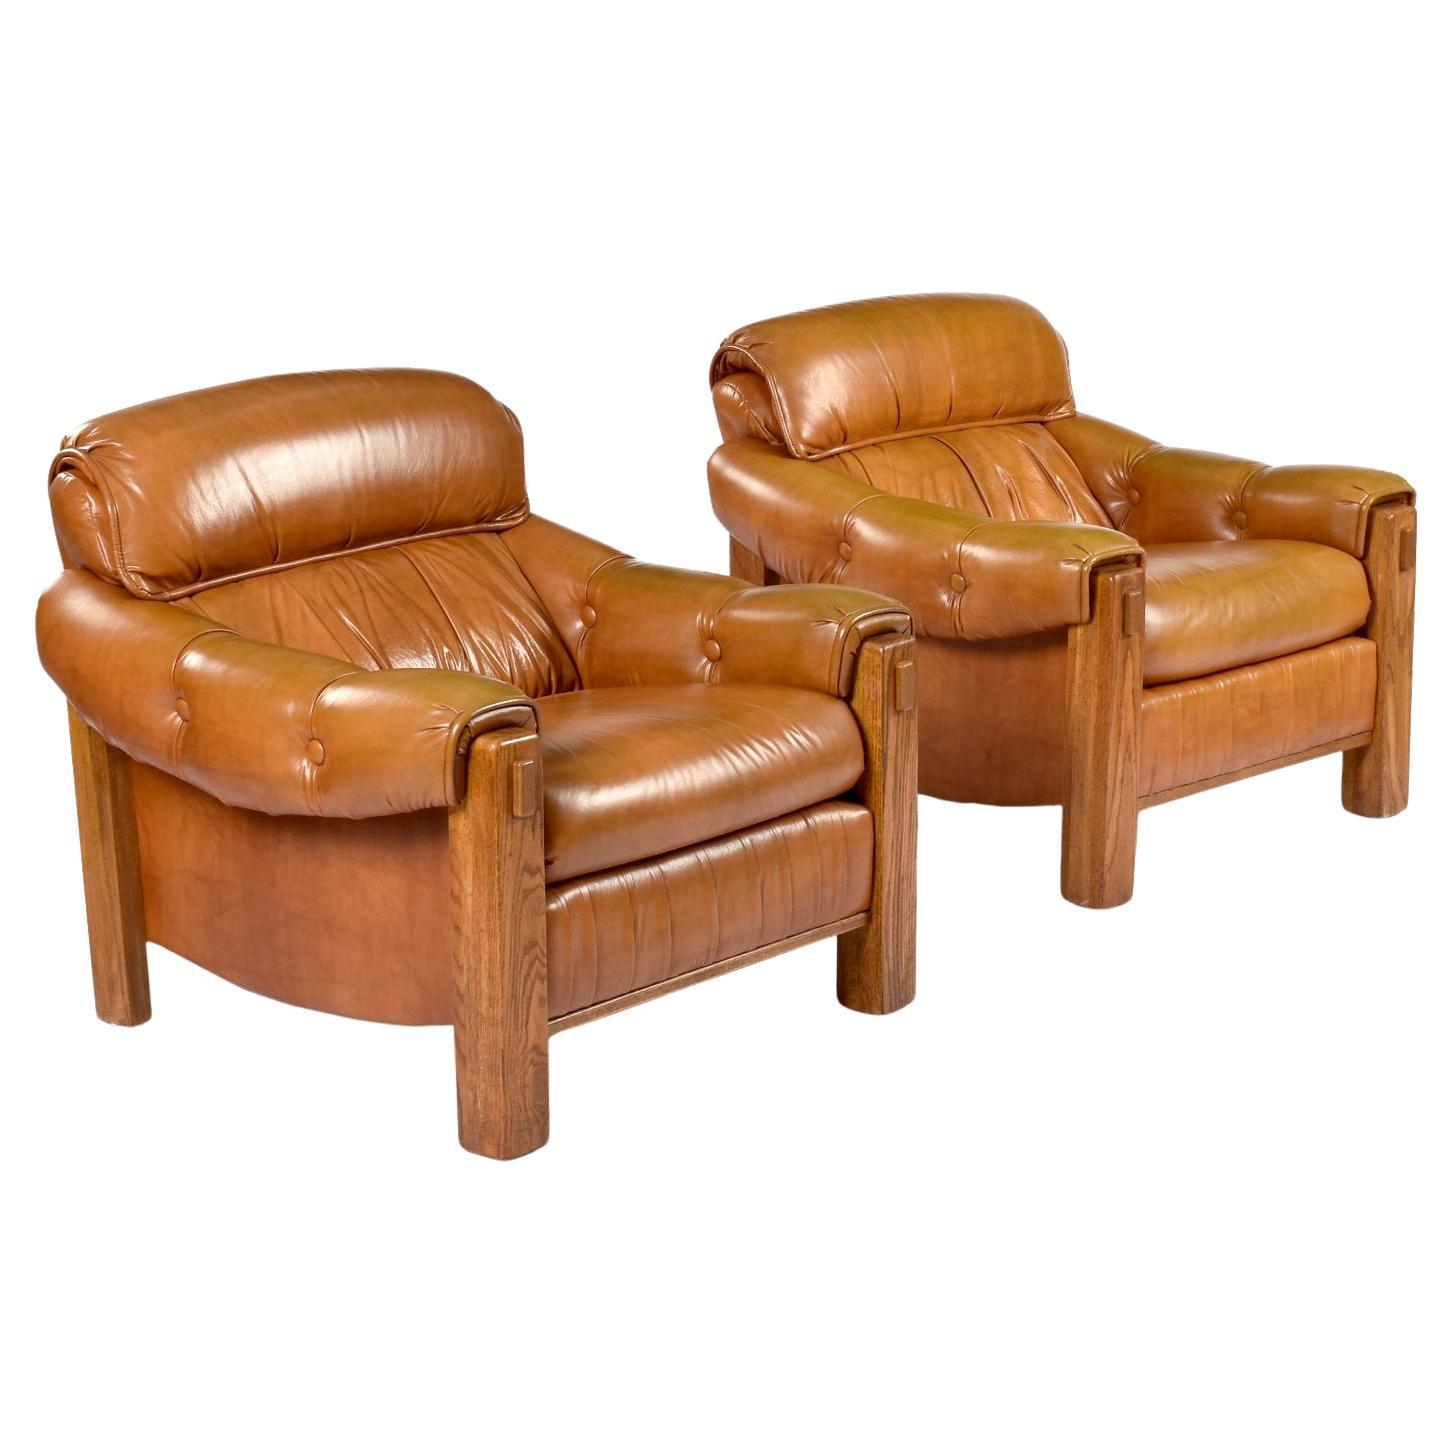 Pair of Vintage 1970s Ample Butterscotch Brown and Oak Tufted Club Chairs